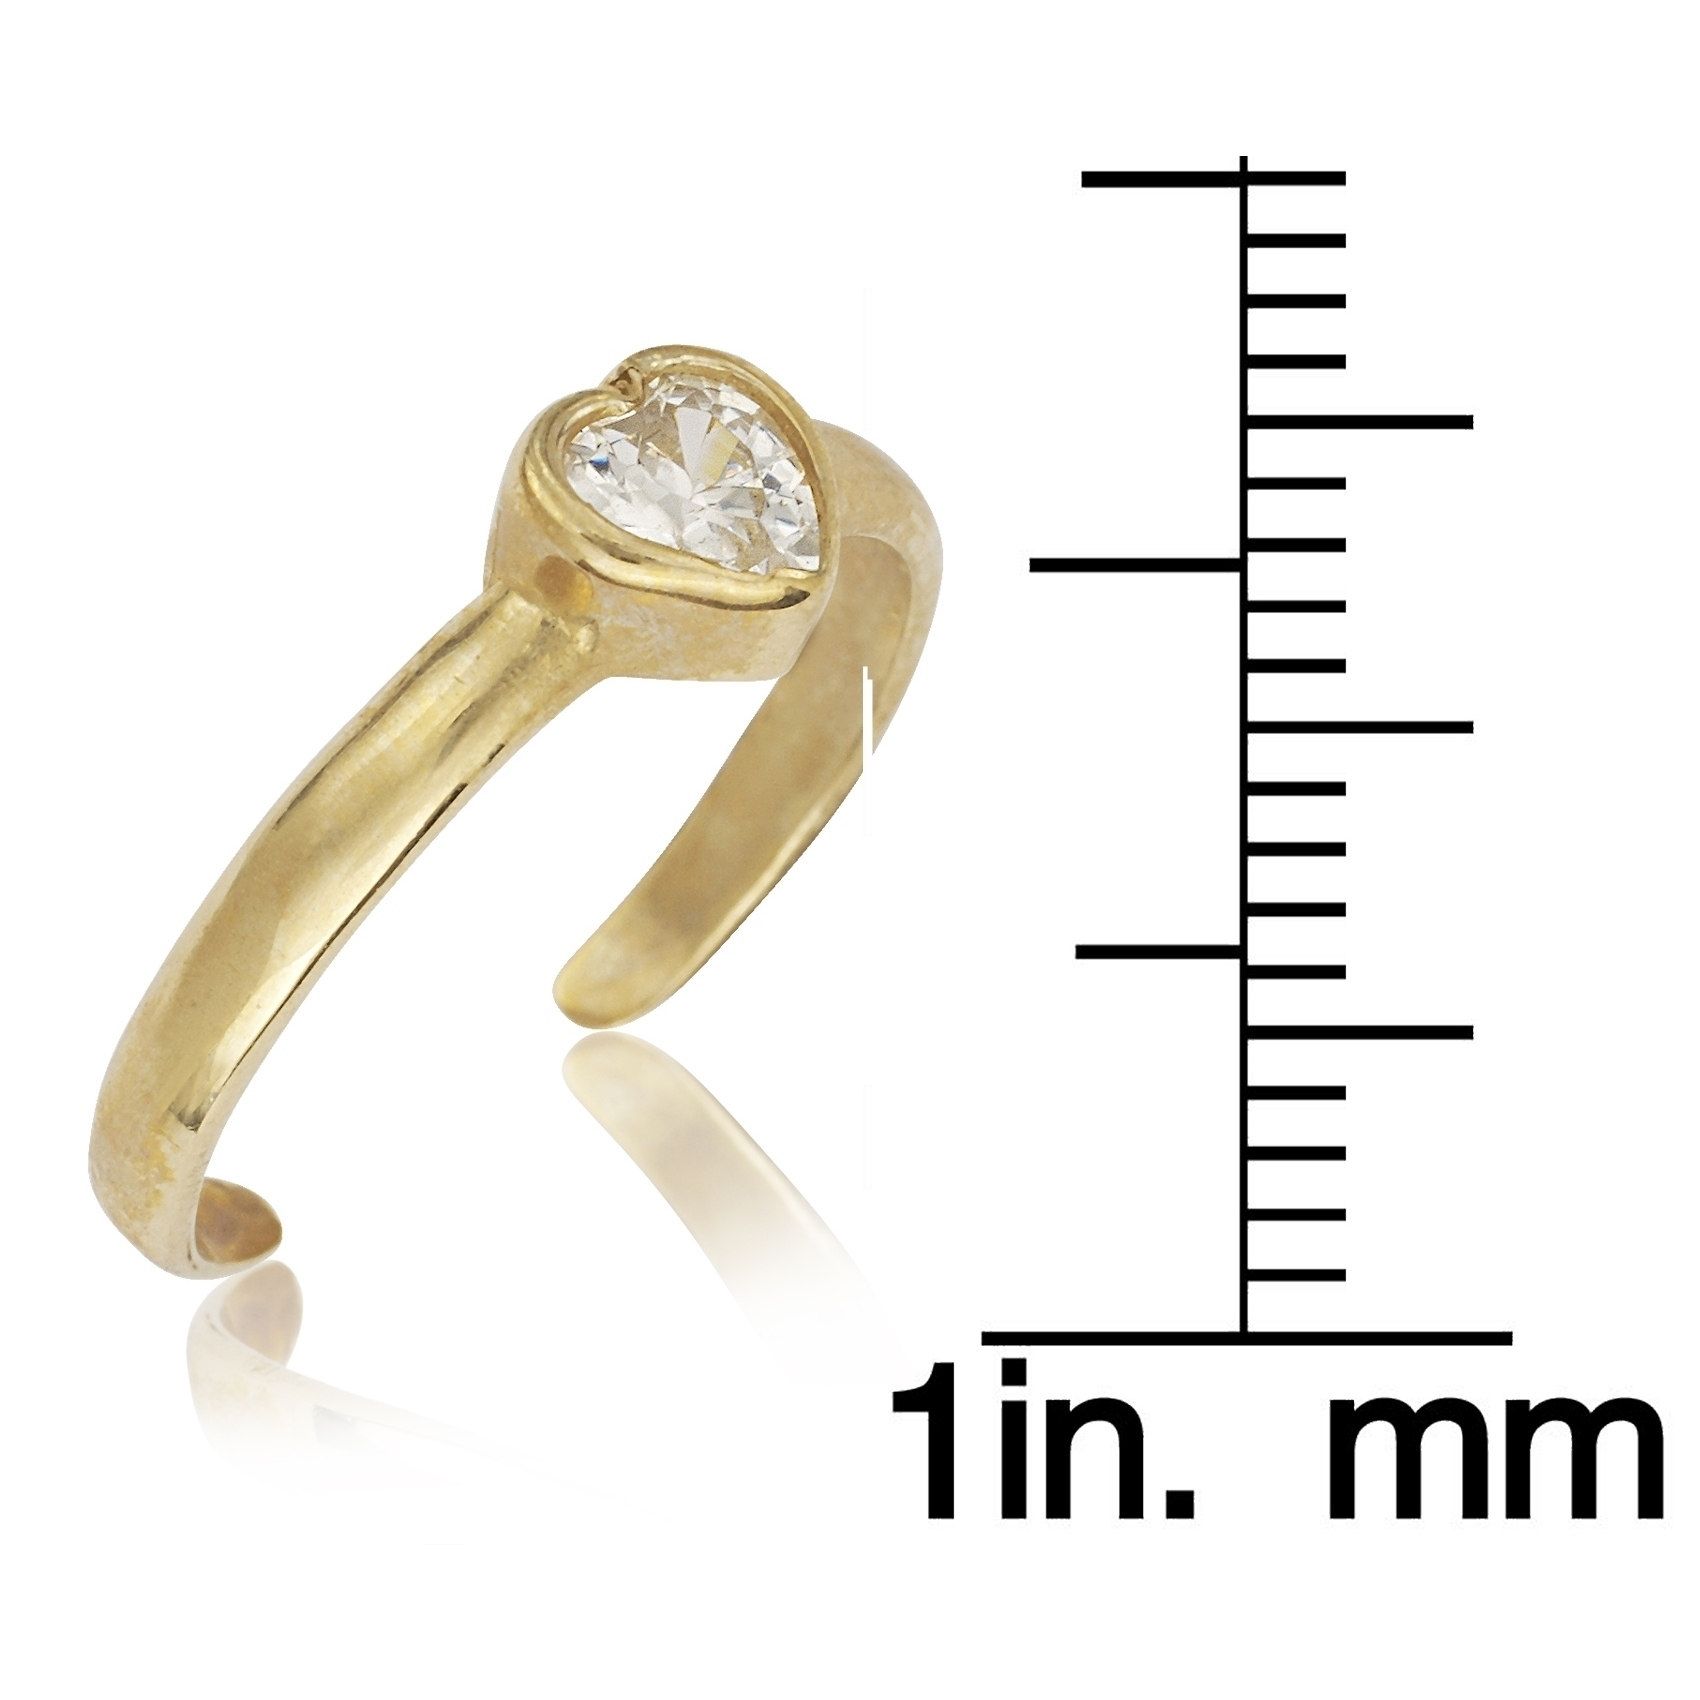 14k Yellow Or White Gold Adjustable Heart Shaped Cubic Zirconia Intended For Most Up To Date 14k Toe Rings (View 21 of 25)